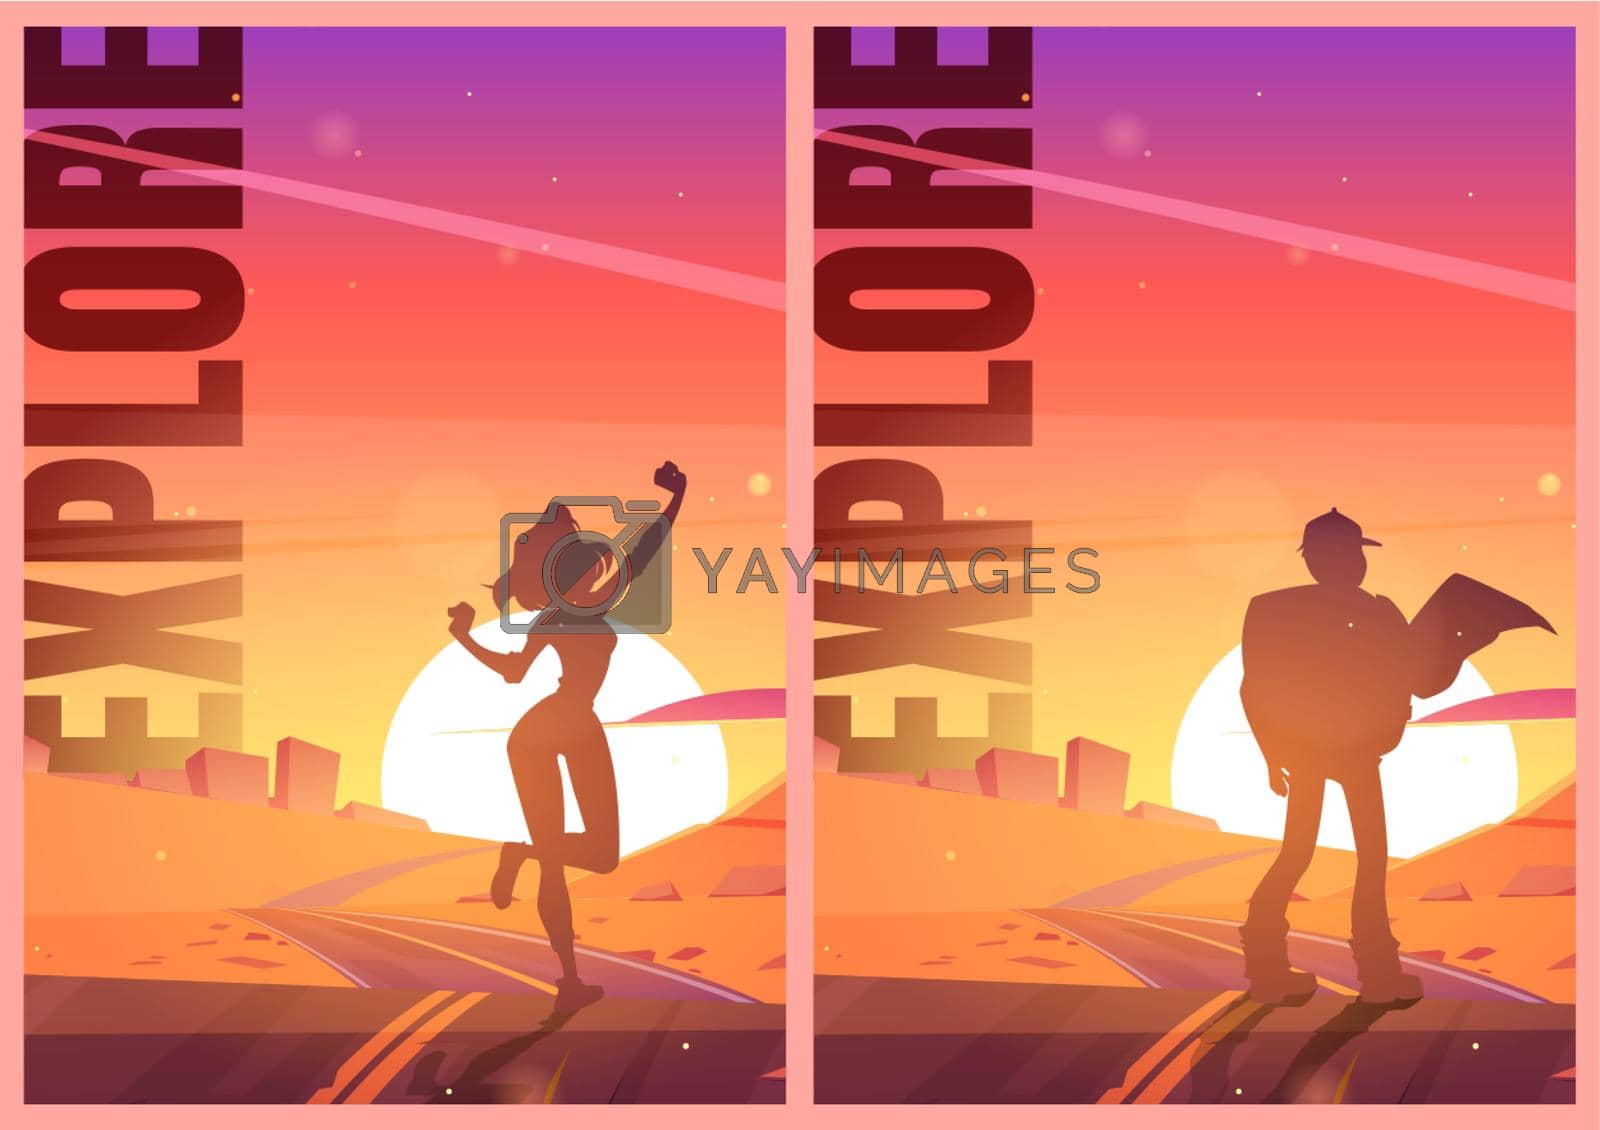 Explore posters with man hiker and girl silhouettes on road in desert. Vector flyers of travel and hiking with cartoon illustration of desert landscape with highway, rocks and tourists at sunset